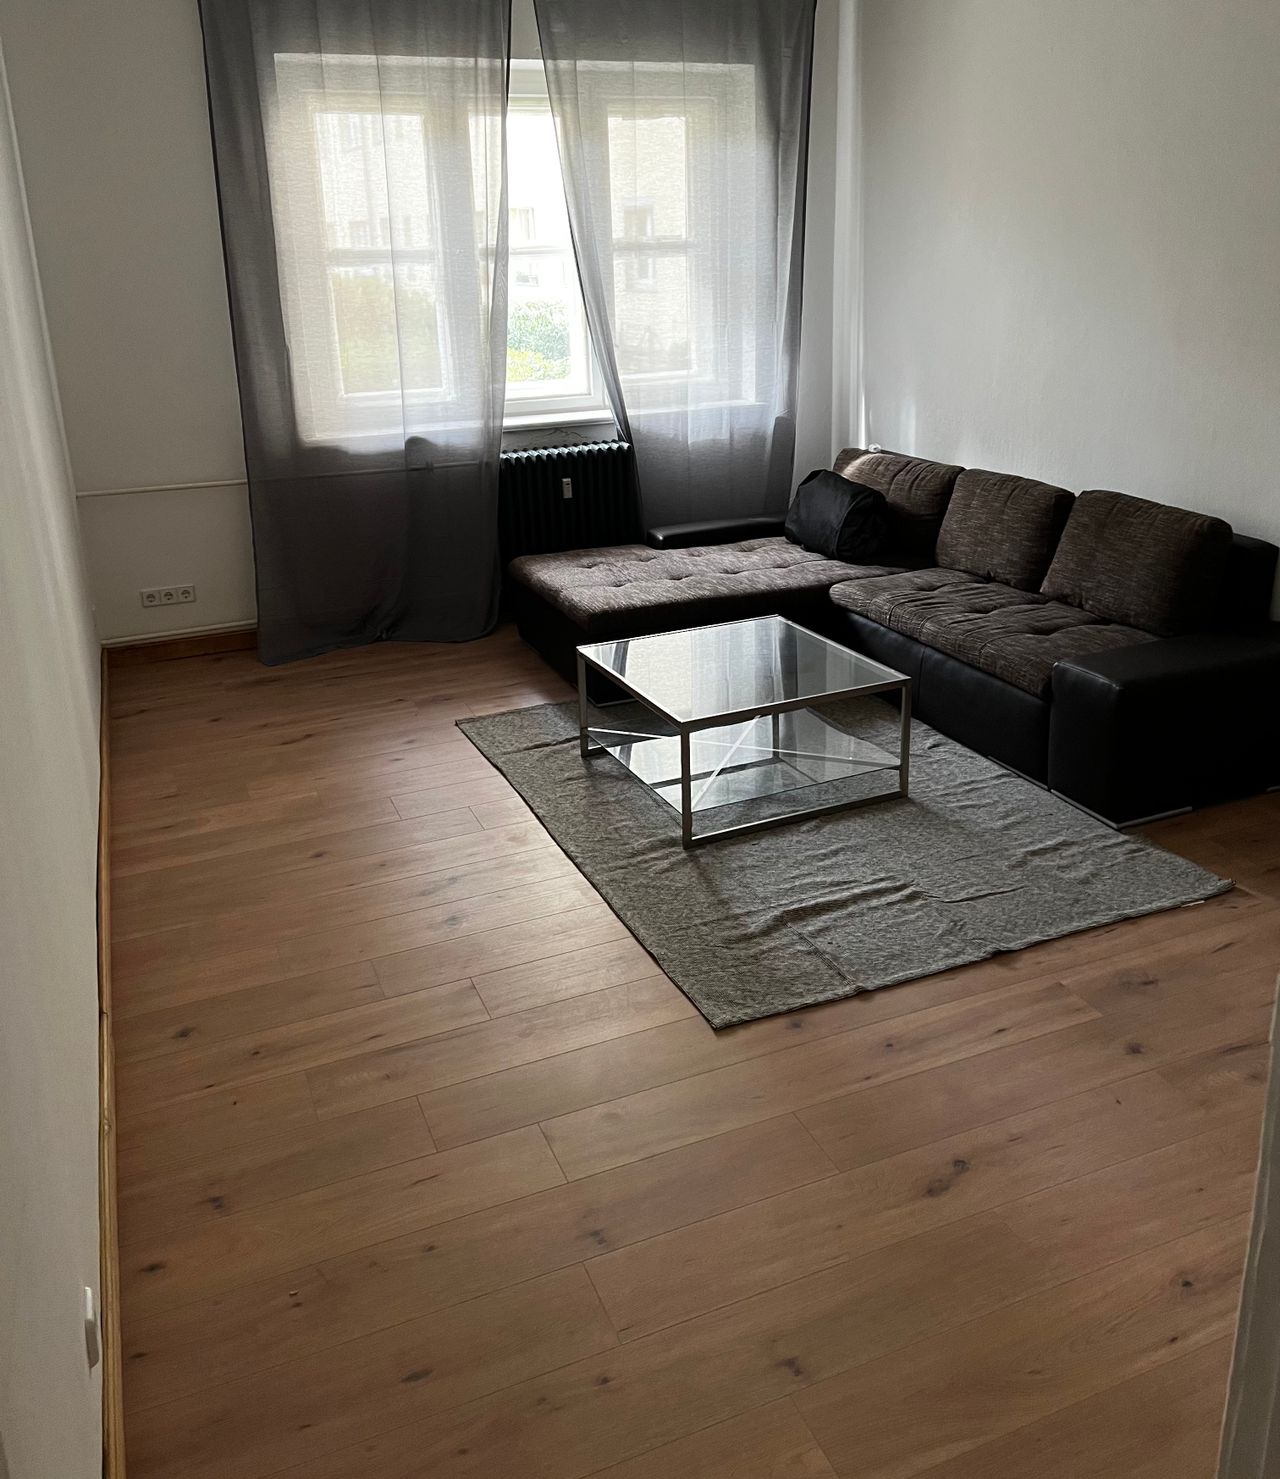 Awesome apartment in Wilmersdorf (Berlin)